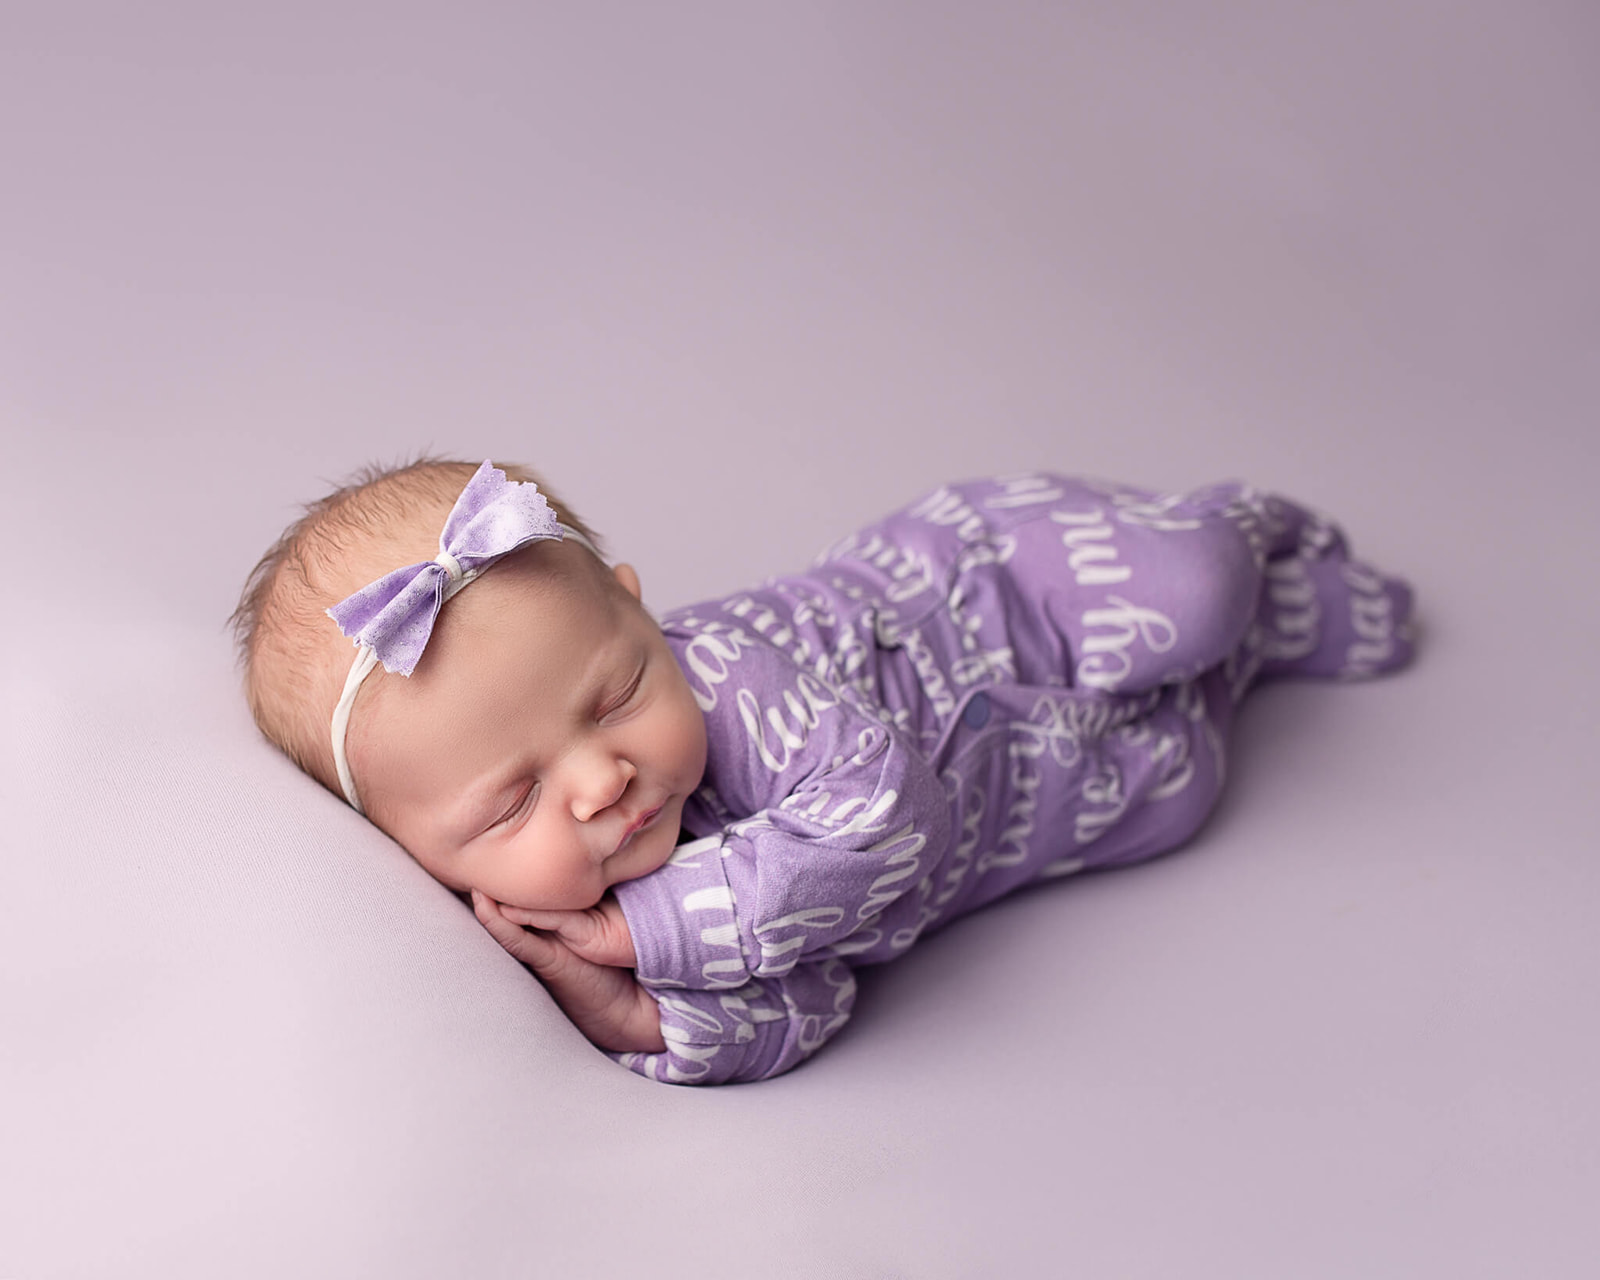 Sleeping newborn in purple for baby formula shortage in Akron OH article